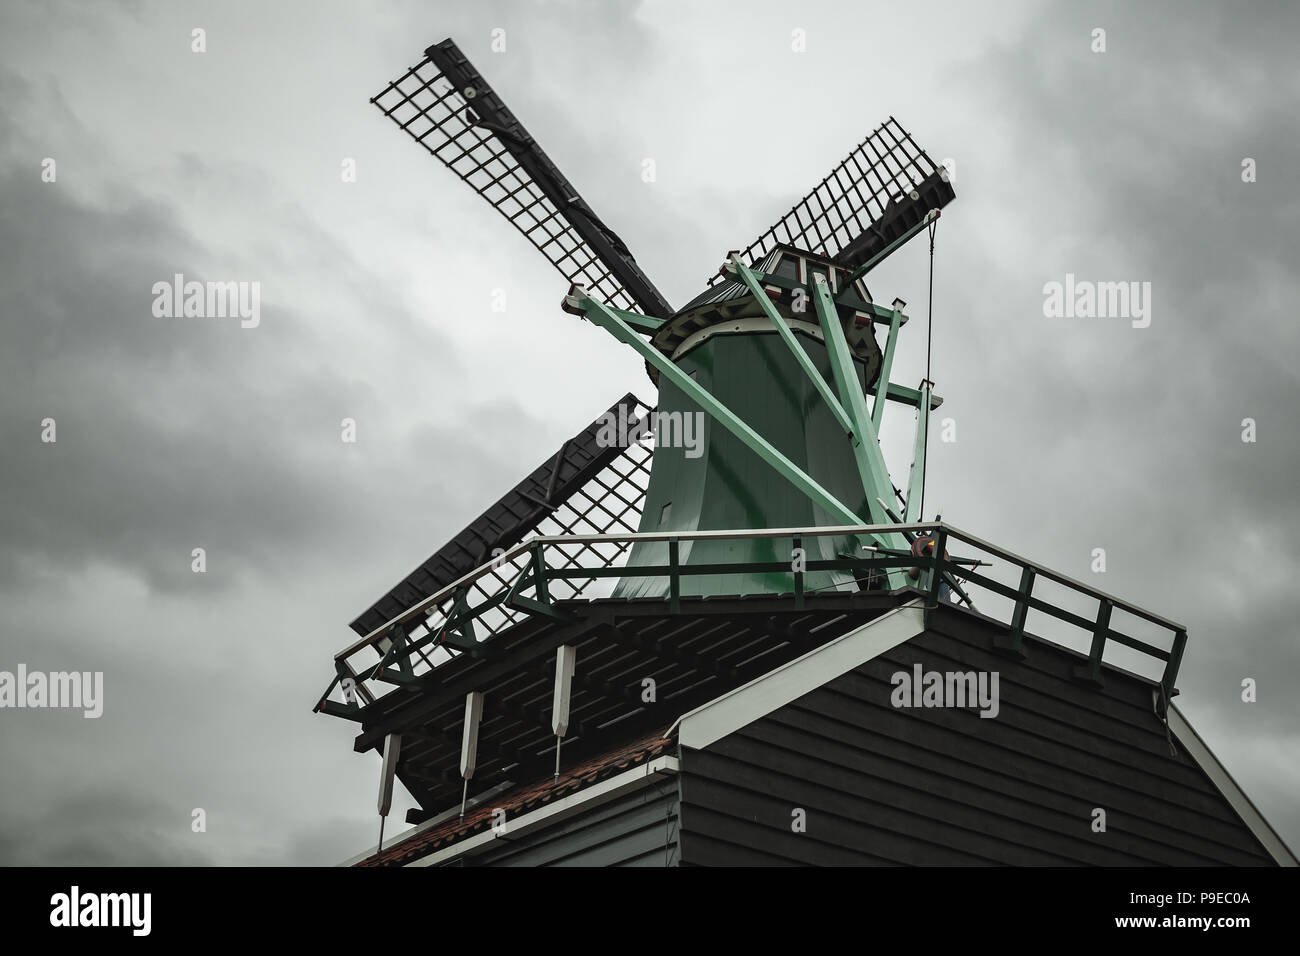 Windmill under dramatic cloudy sky. Zaanse Schans town, popular tourist attractions of the Netherlands. Suburb of Amsterdam Stock Photo